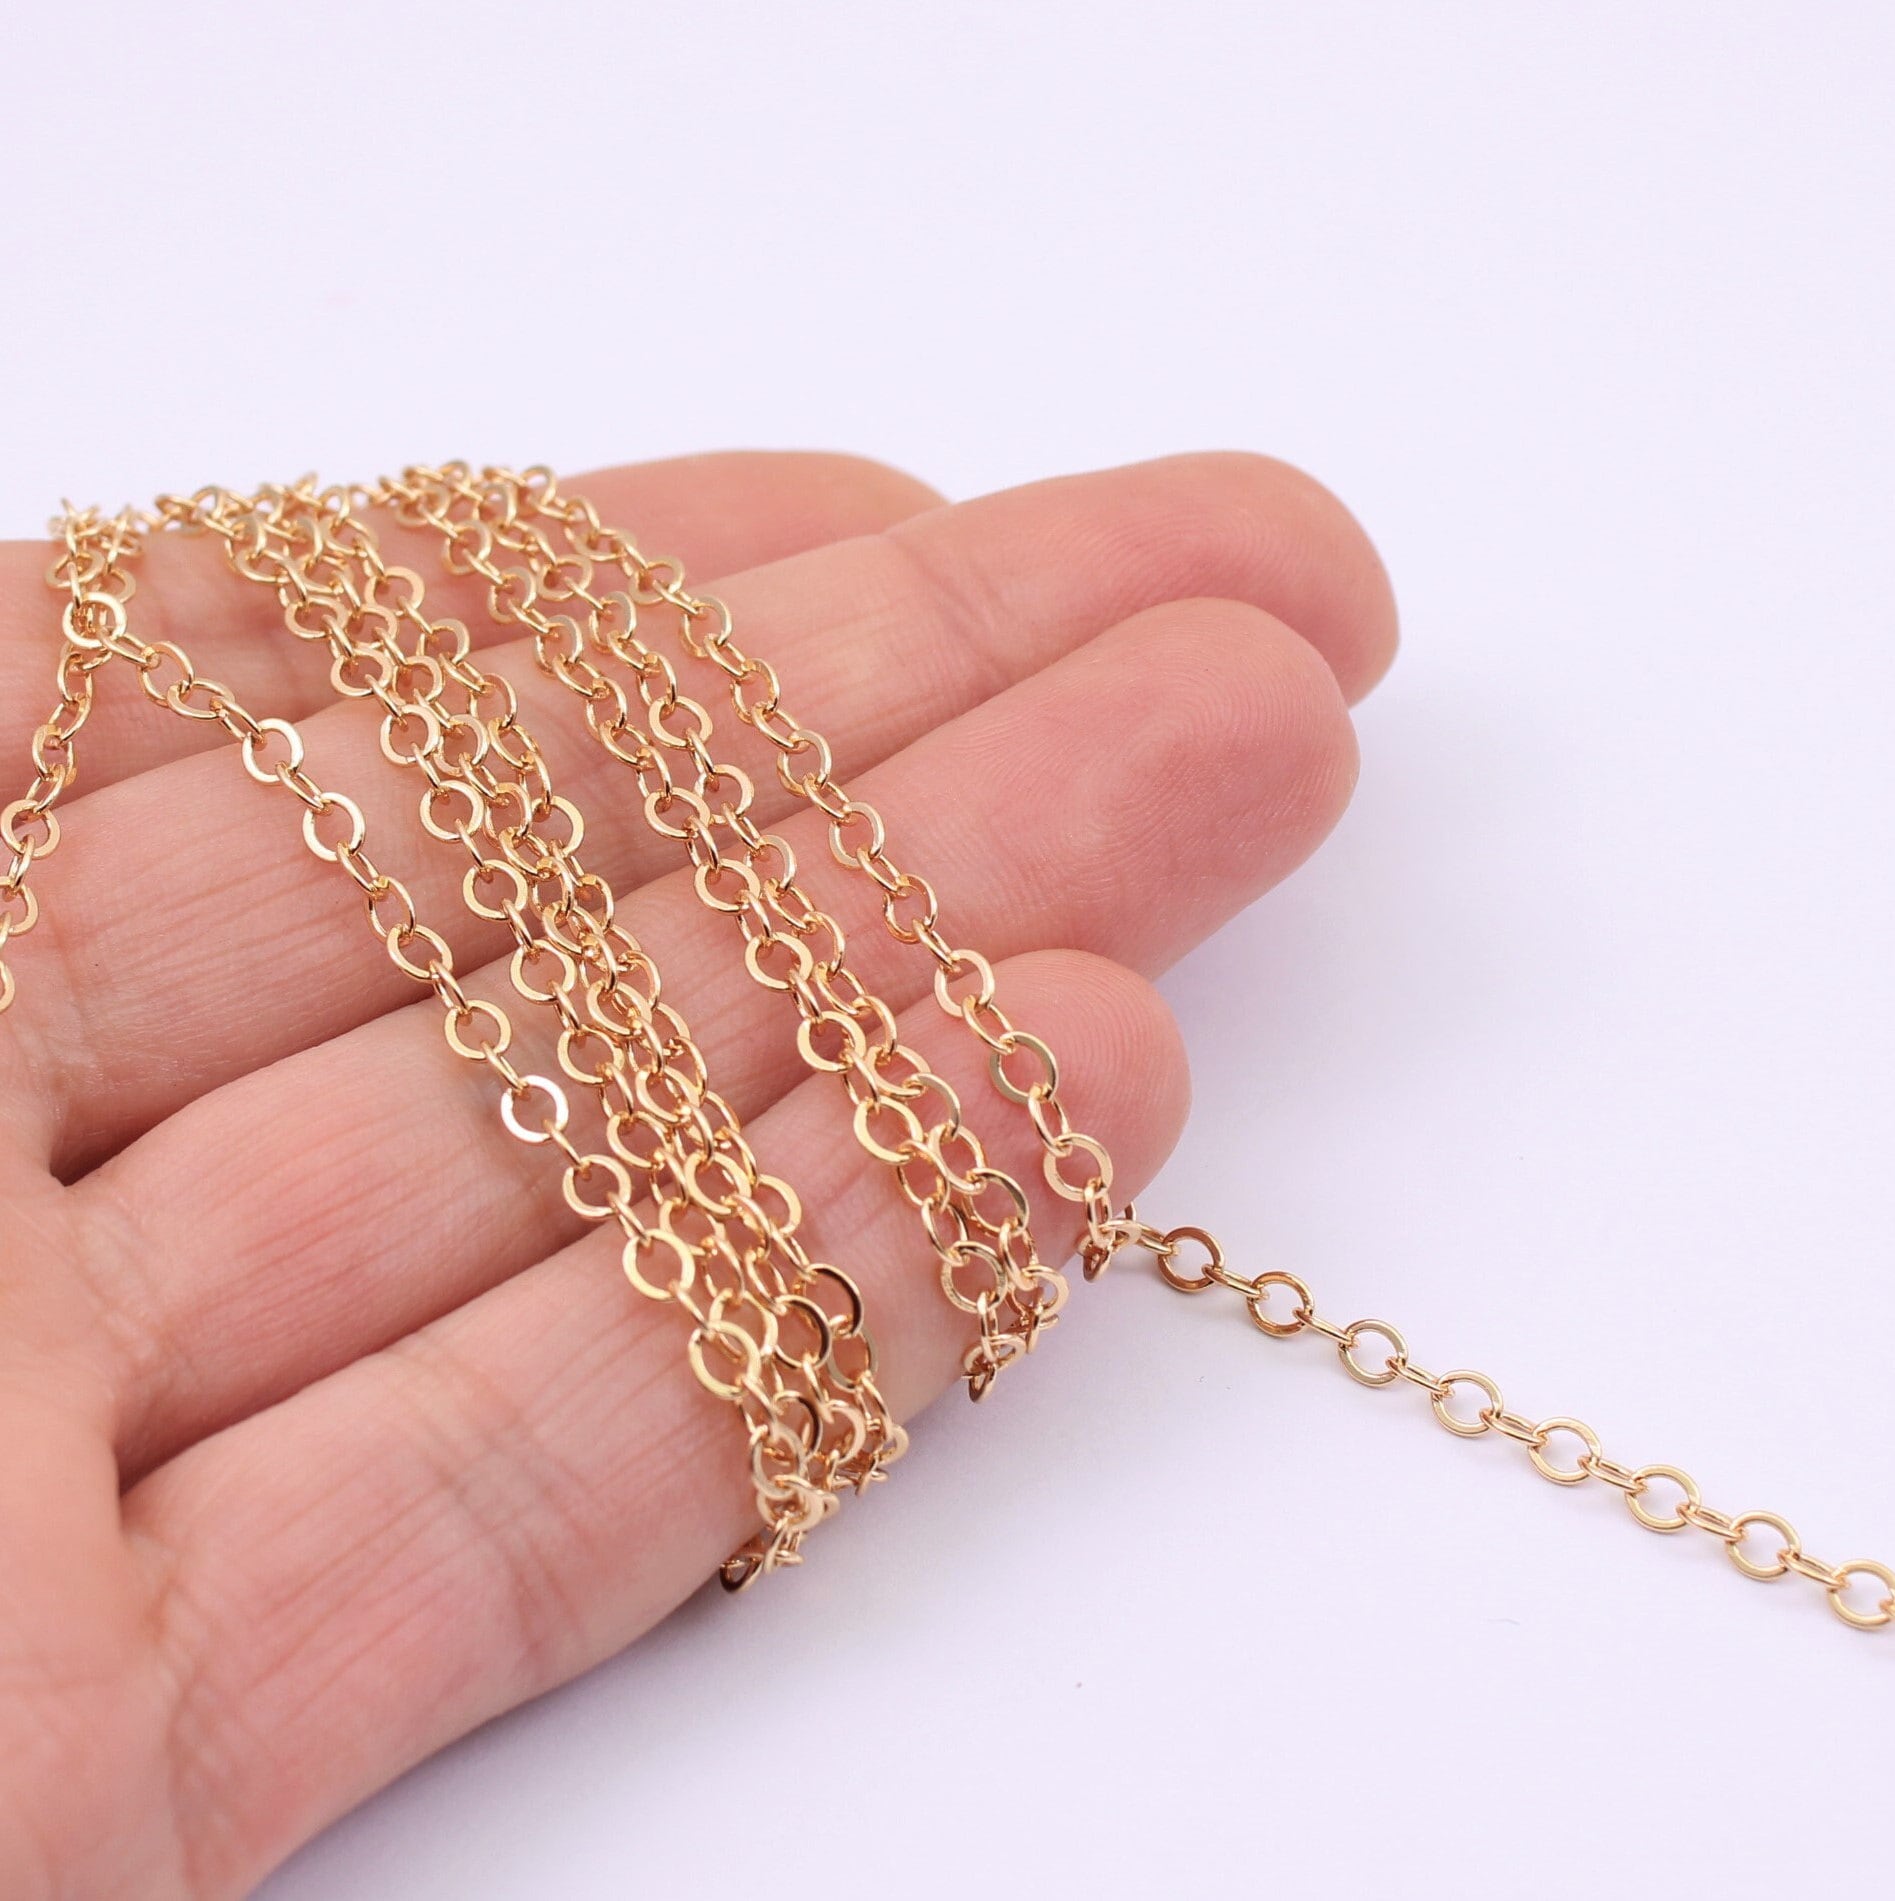 5 M/lot Silver/gold/bronze Plated Necklace Chains for Jewelry Making  Findings Materials Handmade DIY Necklace Chain Supplies 